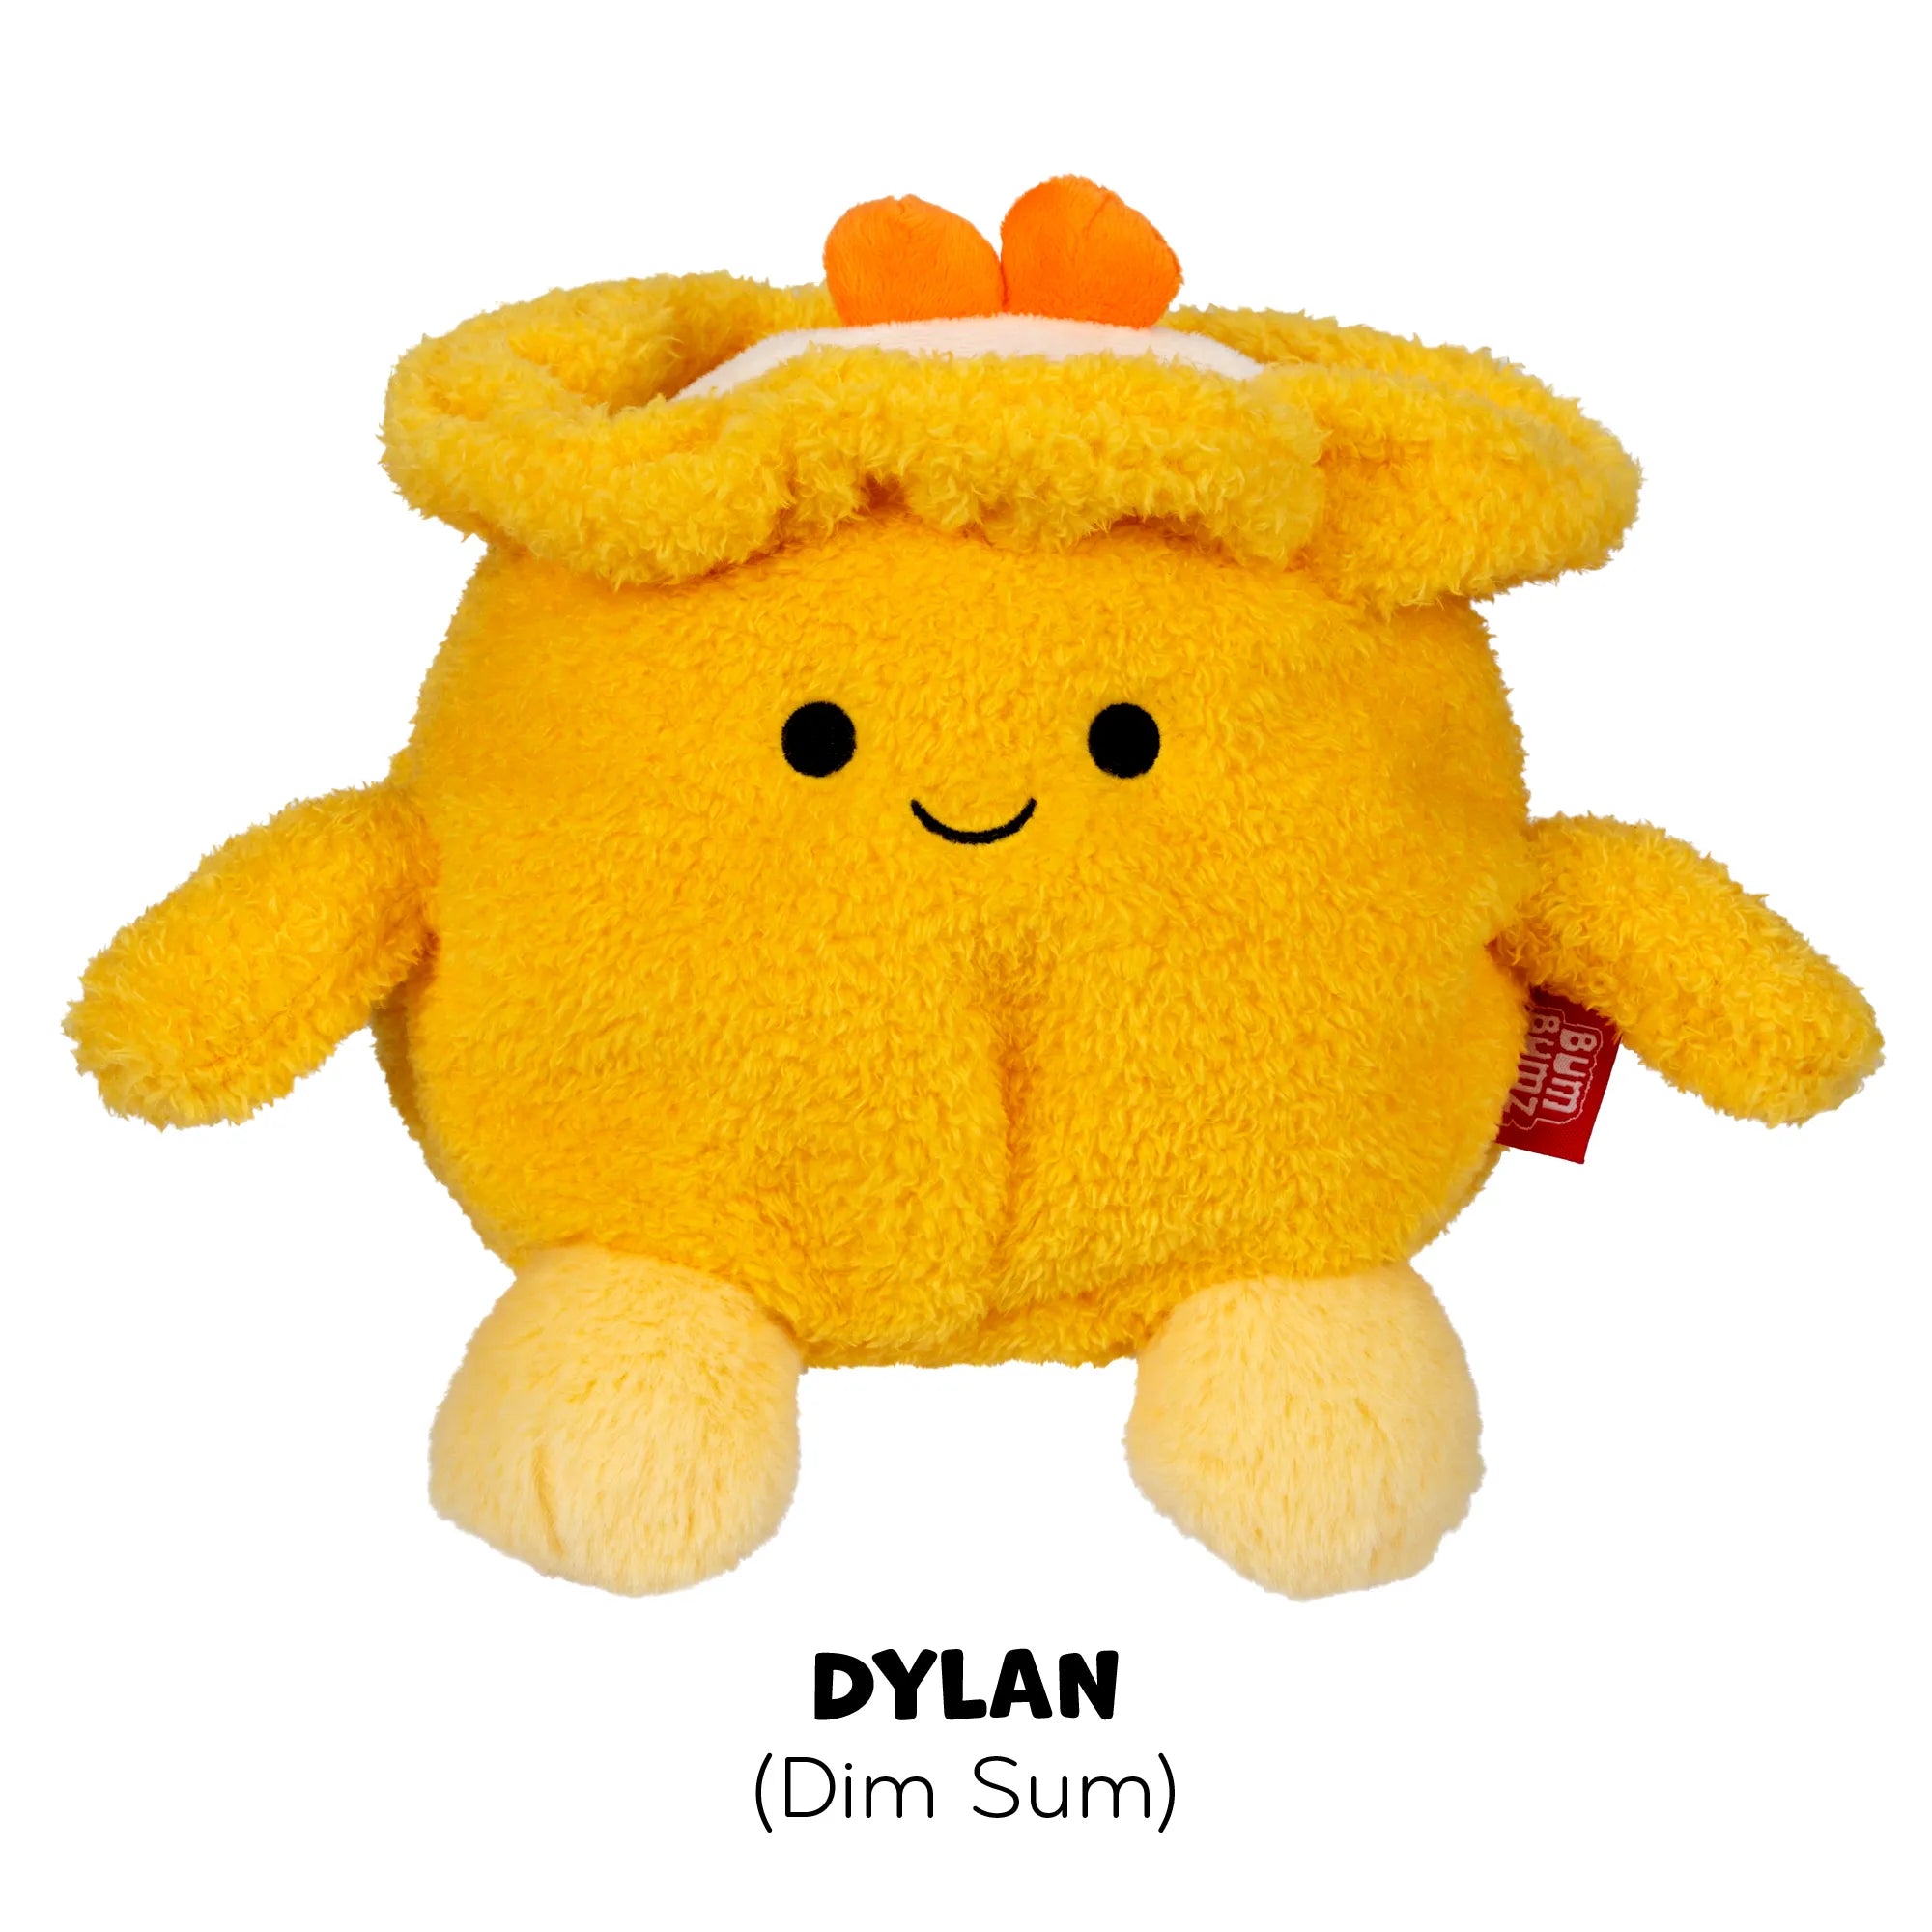 BumBumz Takeout Series - 7.5” Collectibles - Dim Sum 'Dylan' - Ages 3-Adult - Brown's Hobby & Game